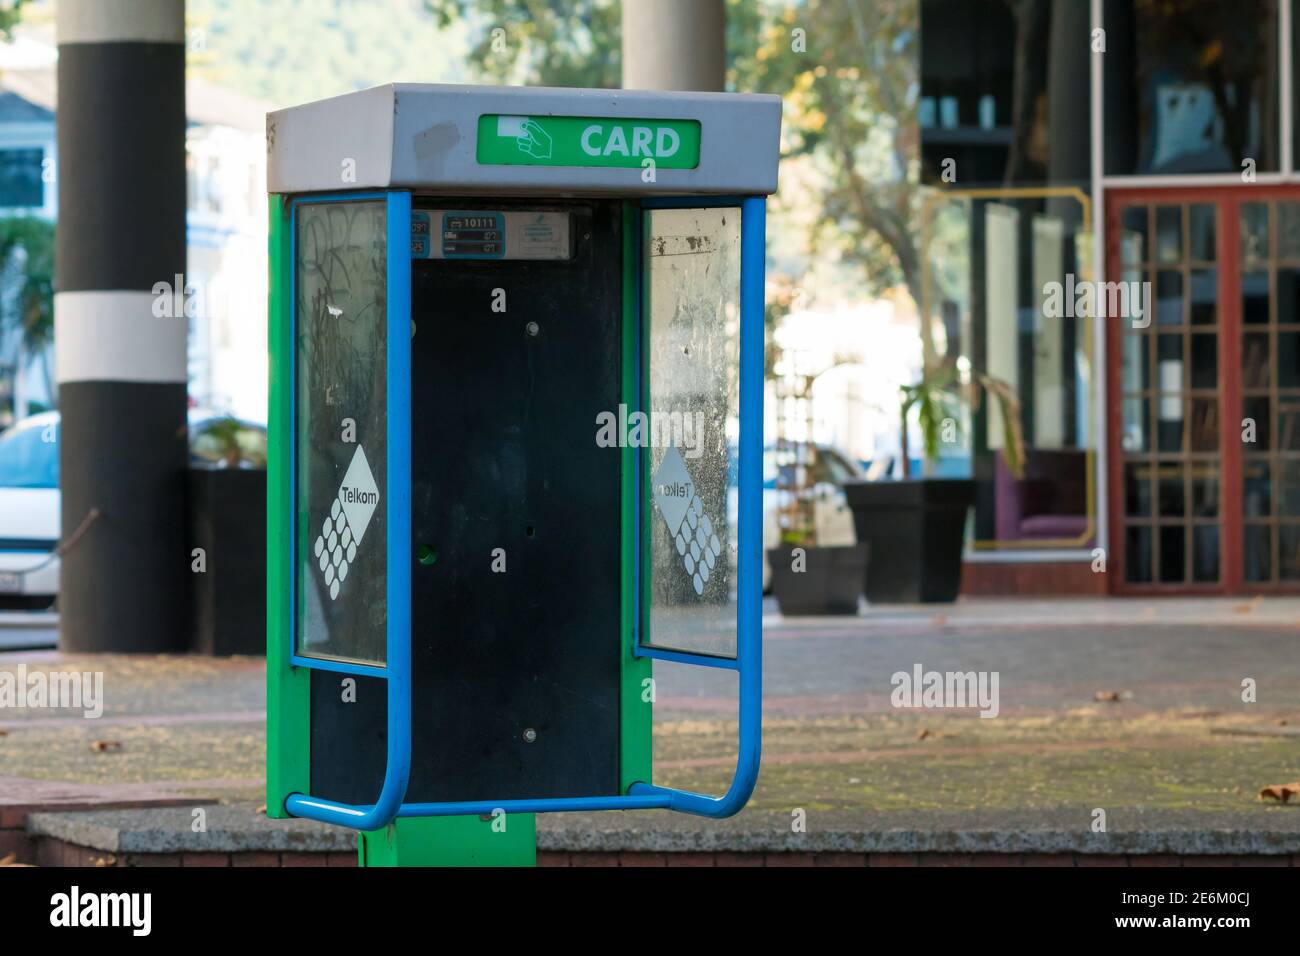 Telkom phone box or booth which has been vandalised and is empty in Cape Town, South Africa Stock Photo